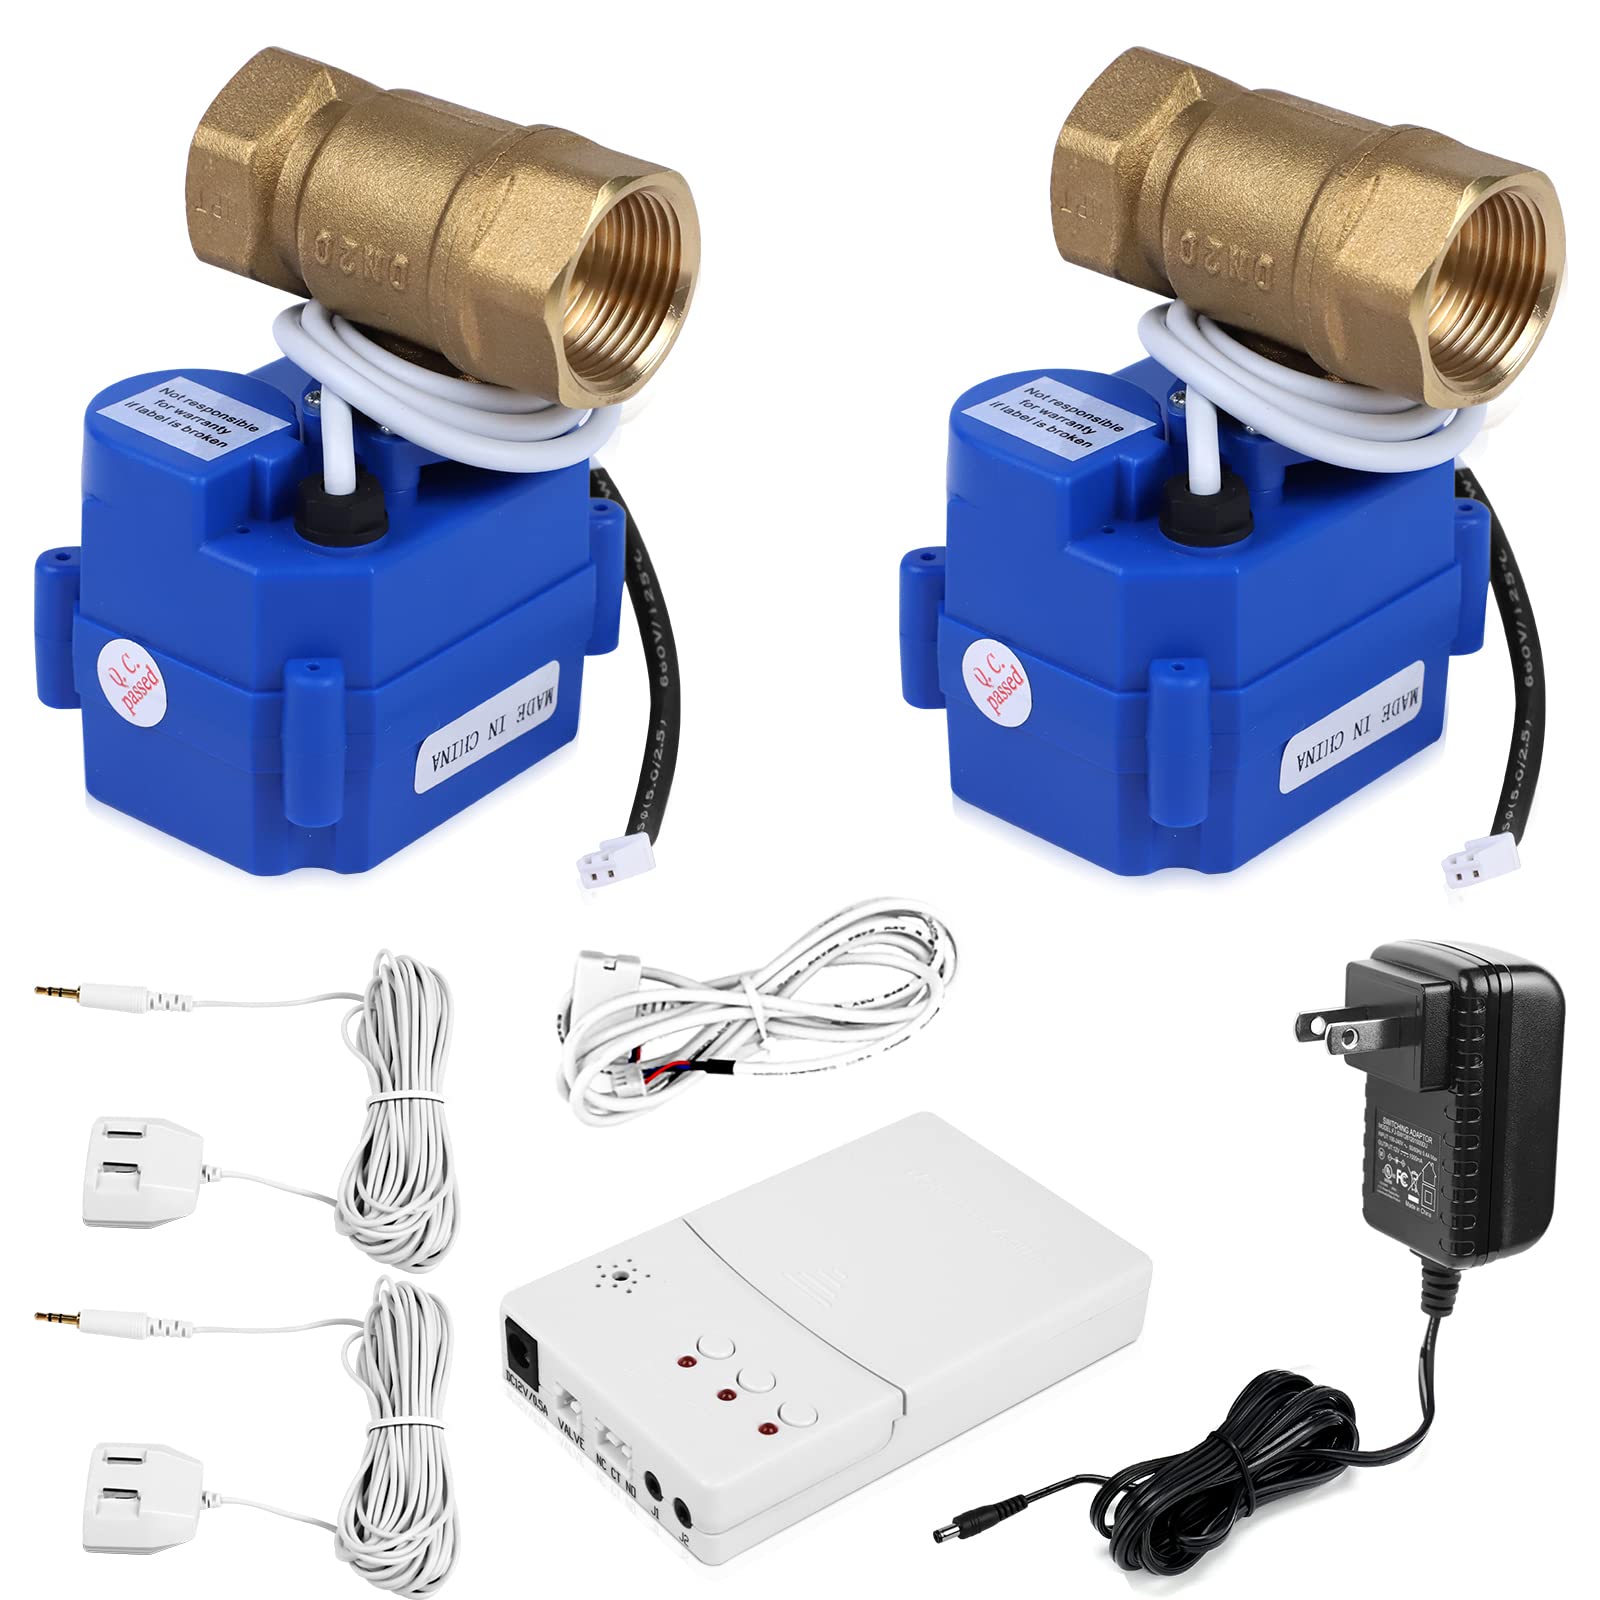 E-SDS Automatic Water Leak Shut Off Valve System,Water Leak Detector with 2 Valves,2 Sensors and Sounds Alarm,for Pipes 3/4 NPT,Flood Prevention fo...